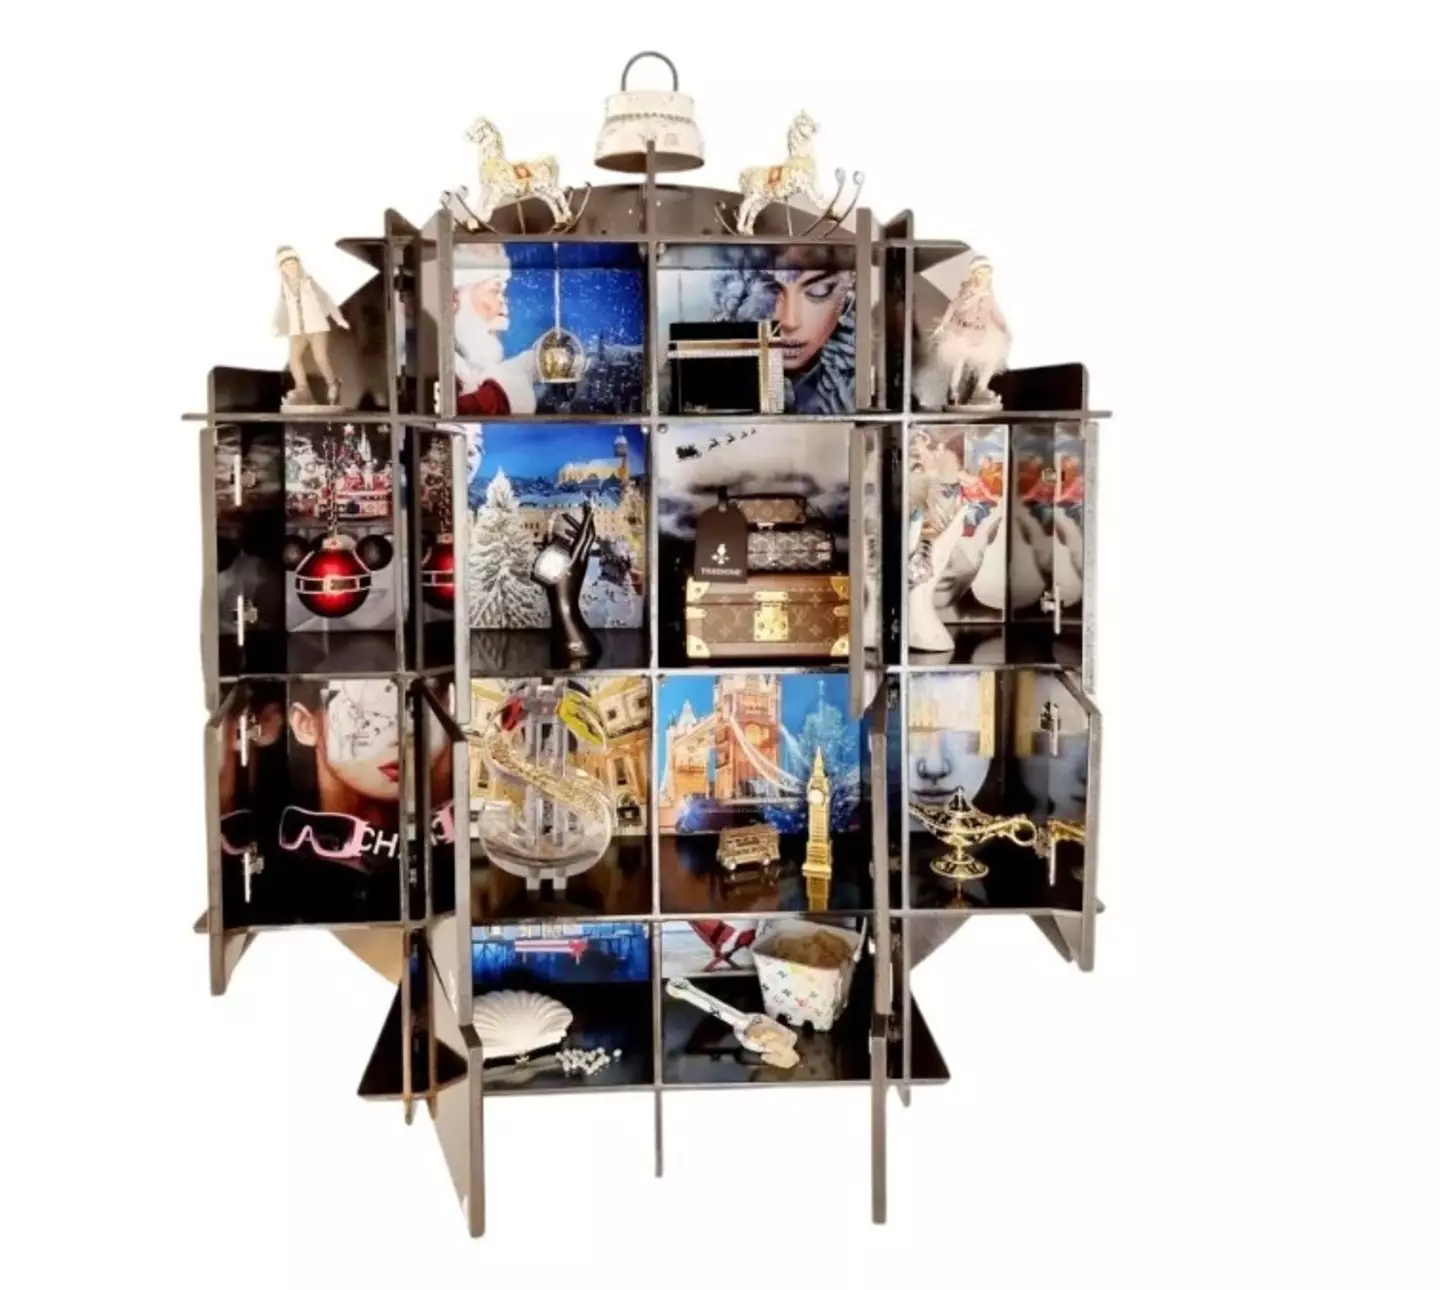 The world's most expensive advent calendar.